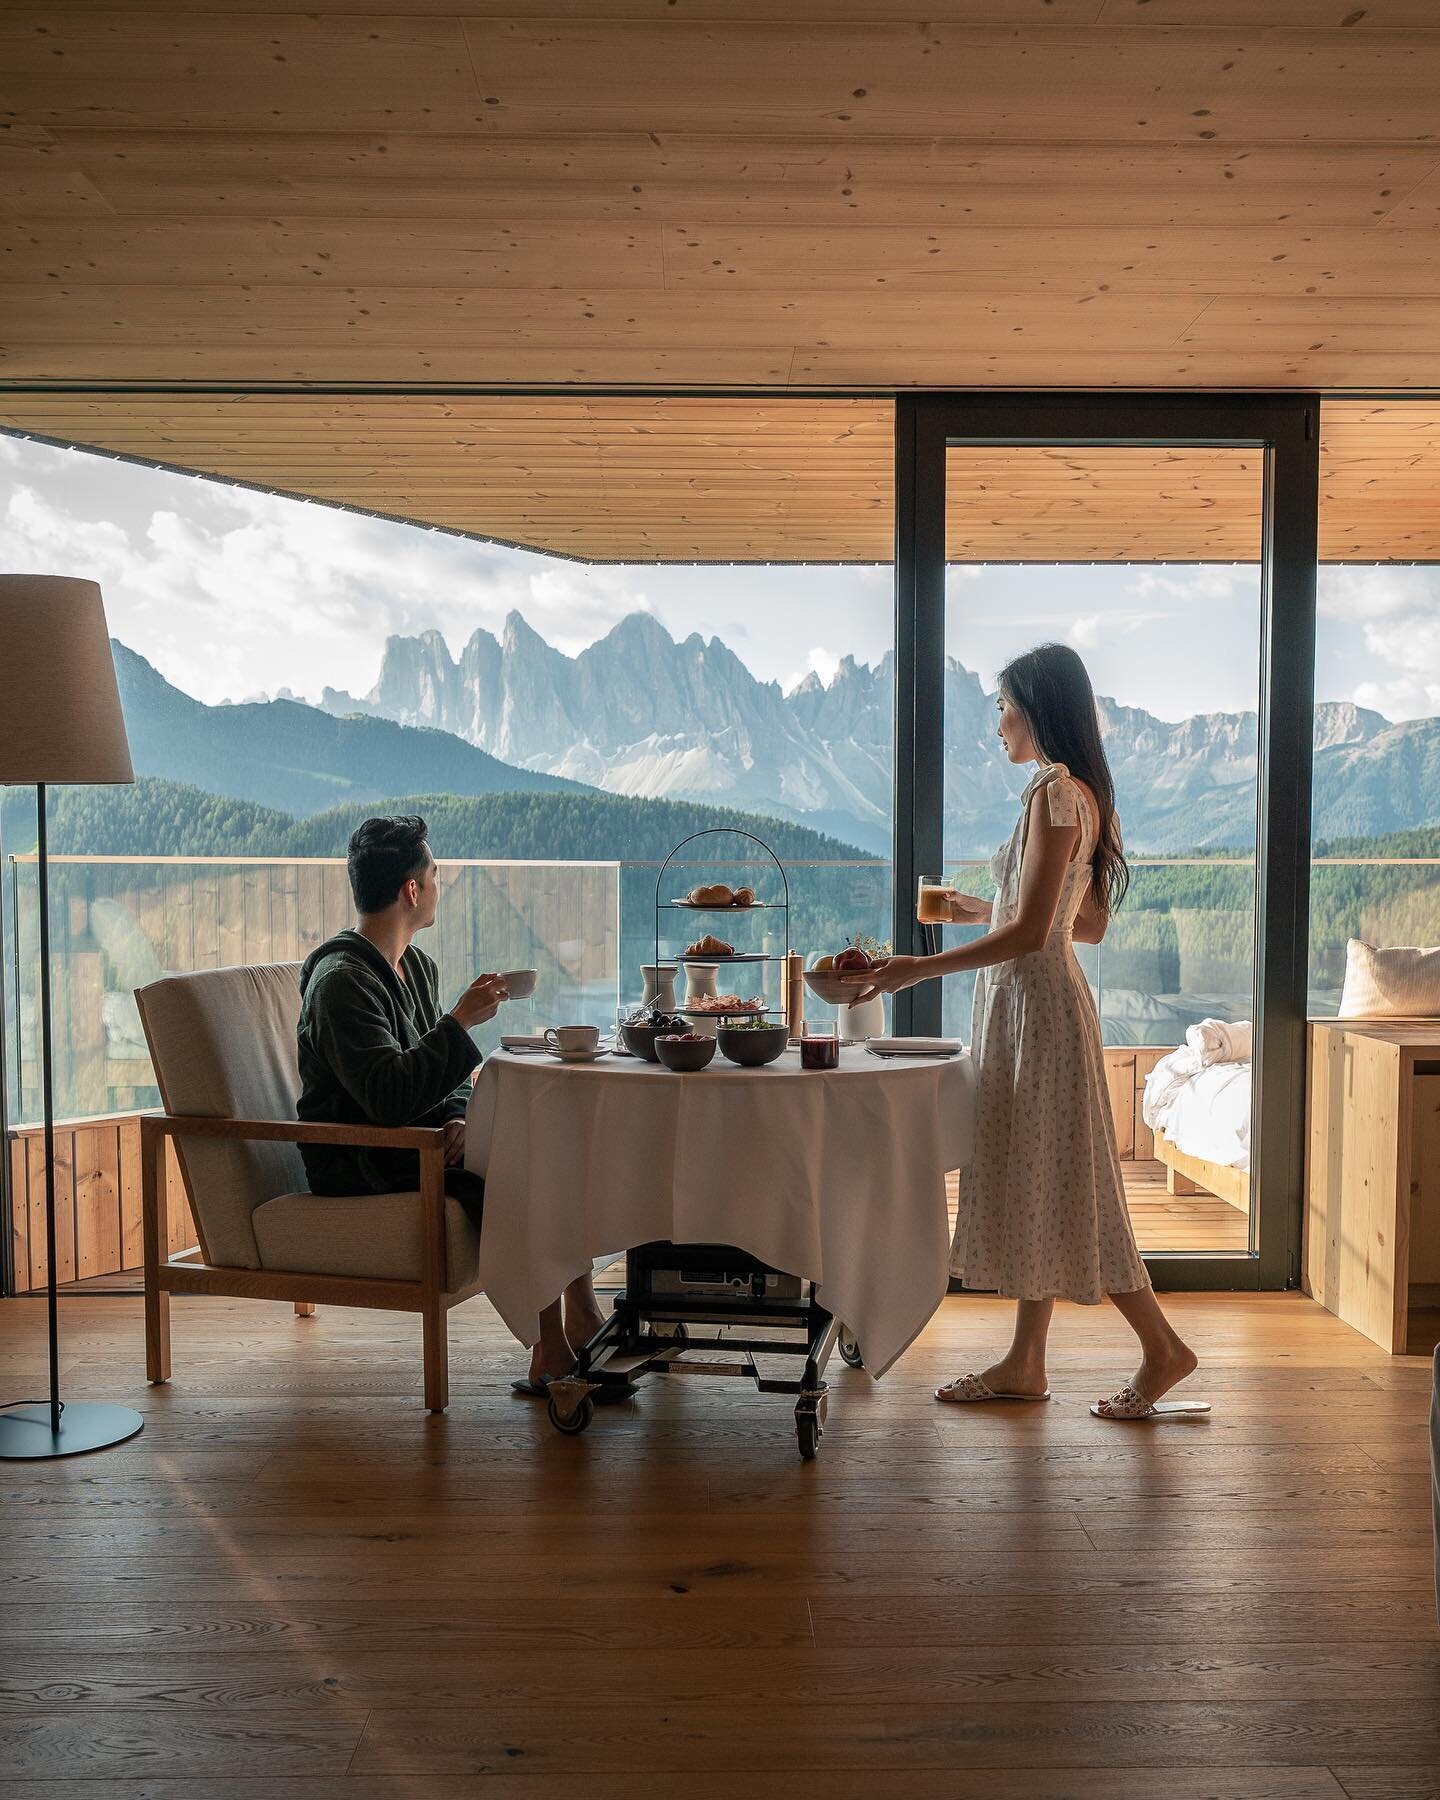 Mr D has officially perfected the &ldquo;looking out into the view&rdquo; look 🤣

Is it time to create an influencer husband account for him? 🤔😆

📍 @forestis.dolomites 

#dolomiti #dolomites #speechlessplaces #beautifulhotels #hotelsandresorts #b